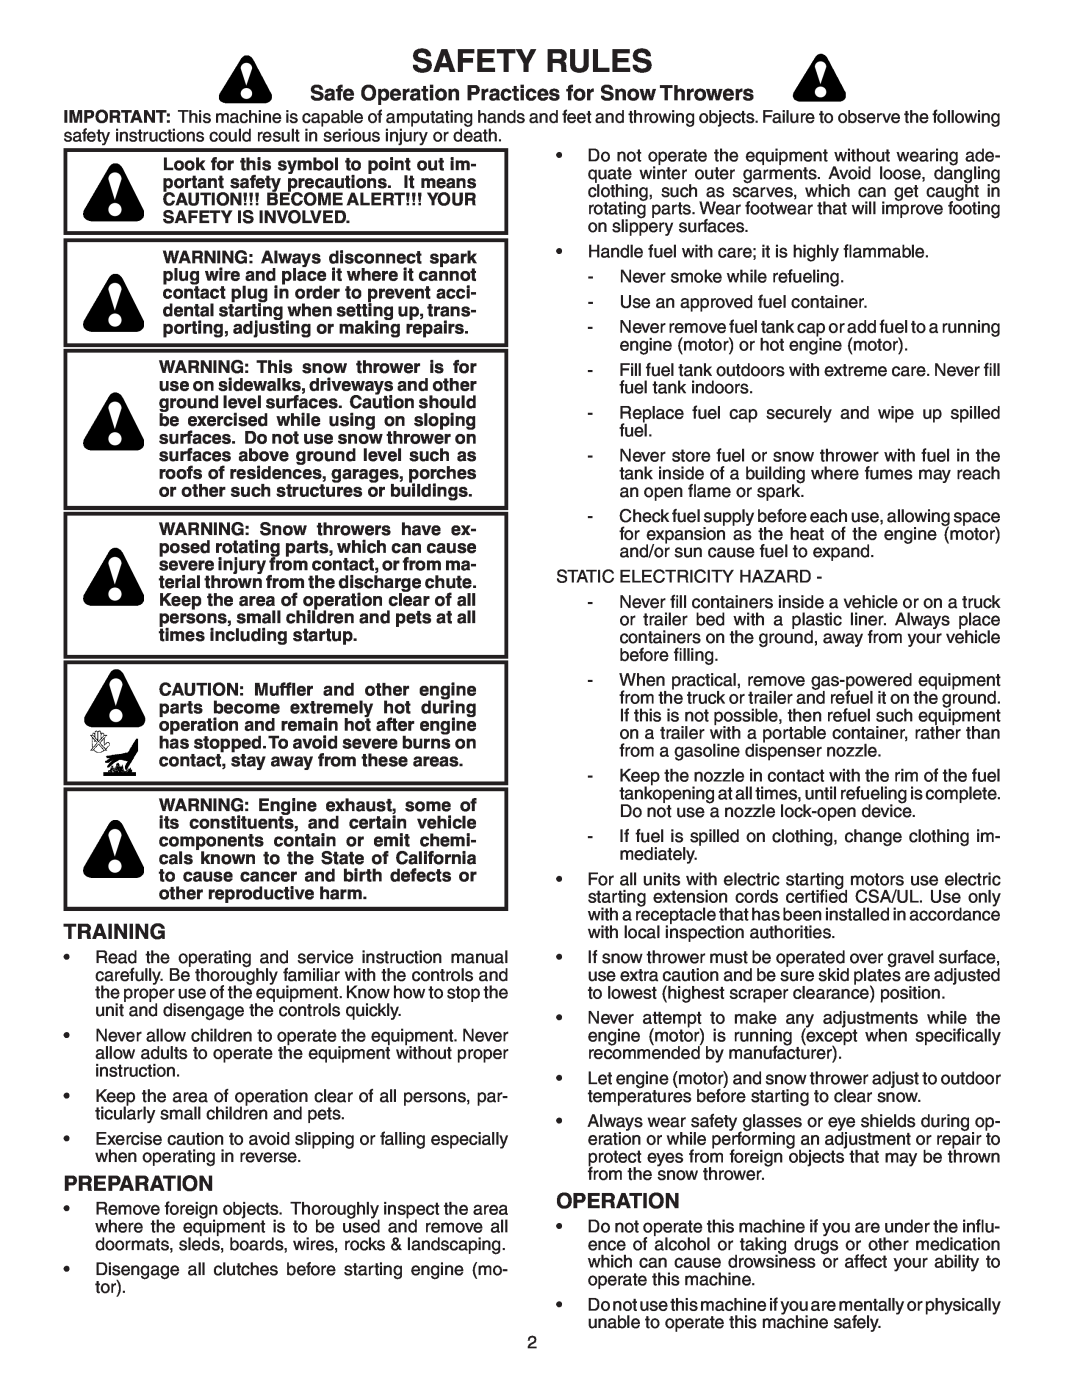 Poulan 187877 owner manual Safety Rules, Safe Operation Practices for Snow Throwers, Training, Preparation 